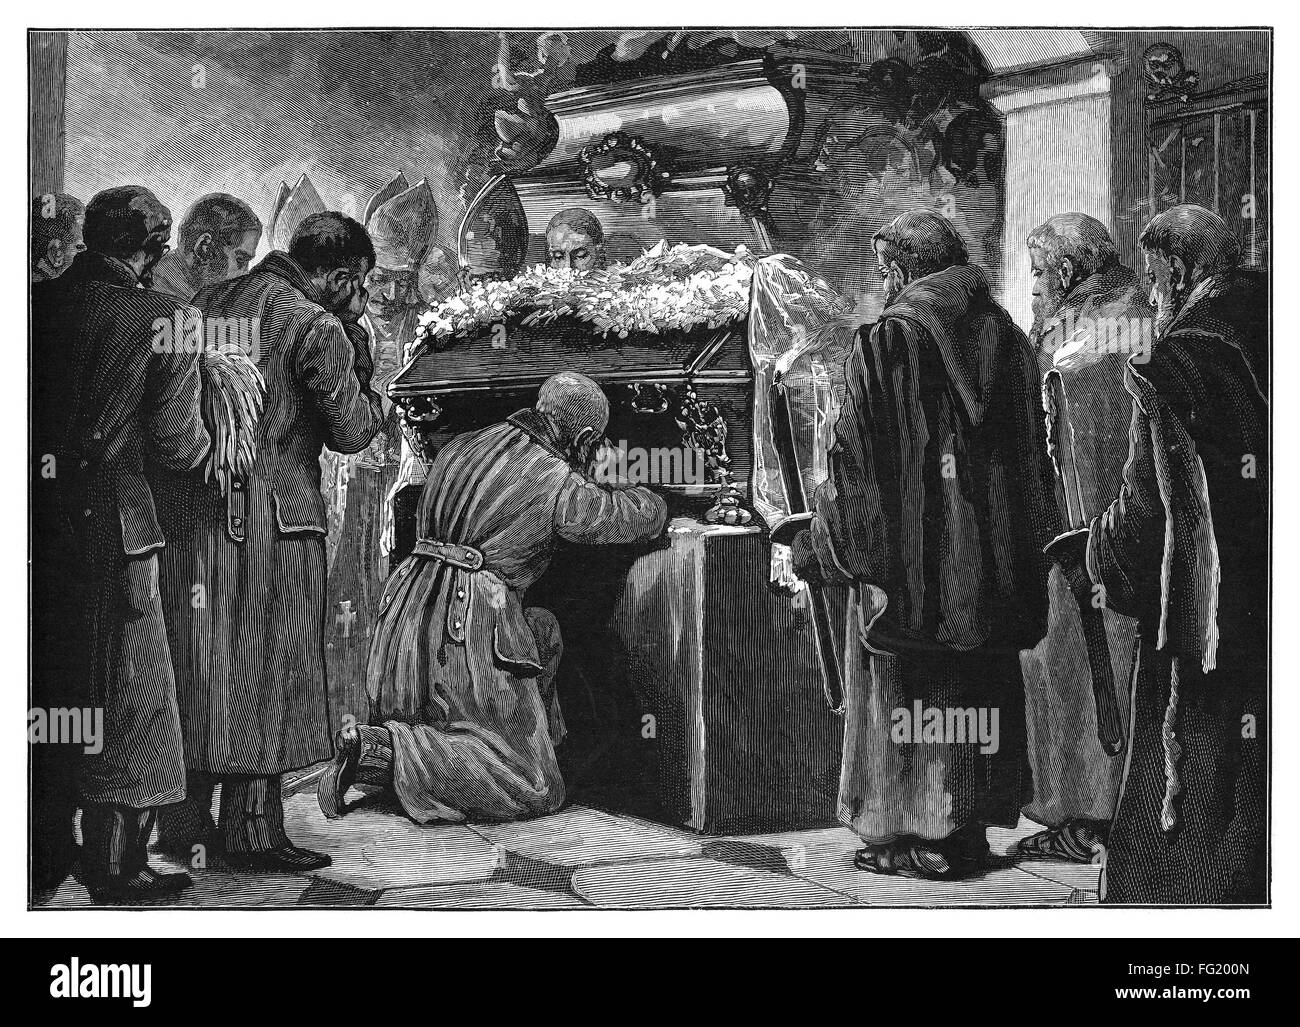 FUNERAL: PRINCE RUDOLF. /n'Funeral of the late Crown Prince of Austria at Vienna - The Emperor kneeling by the coffin in the vault of the Capuchins' Church.' Engraving, 1889. Stock Photo